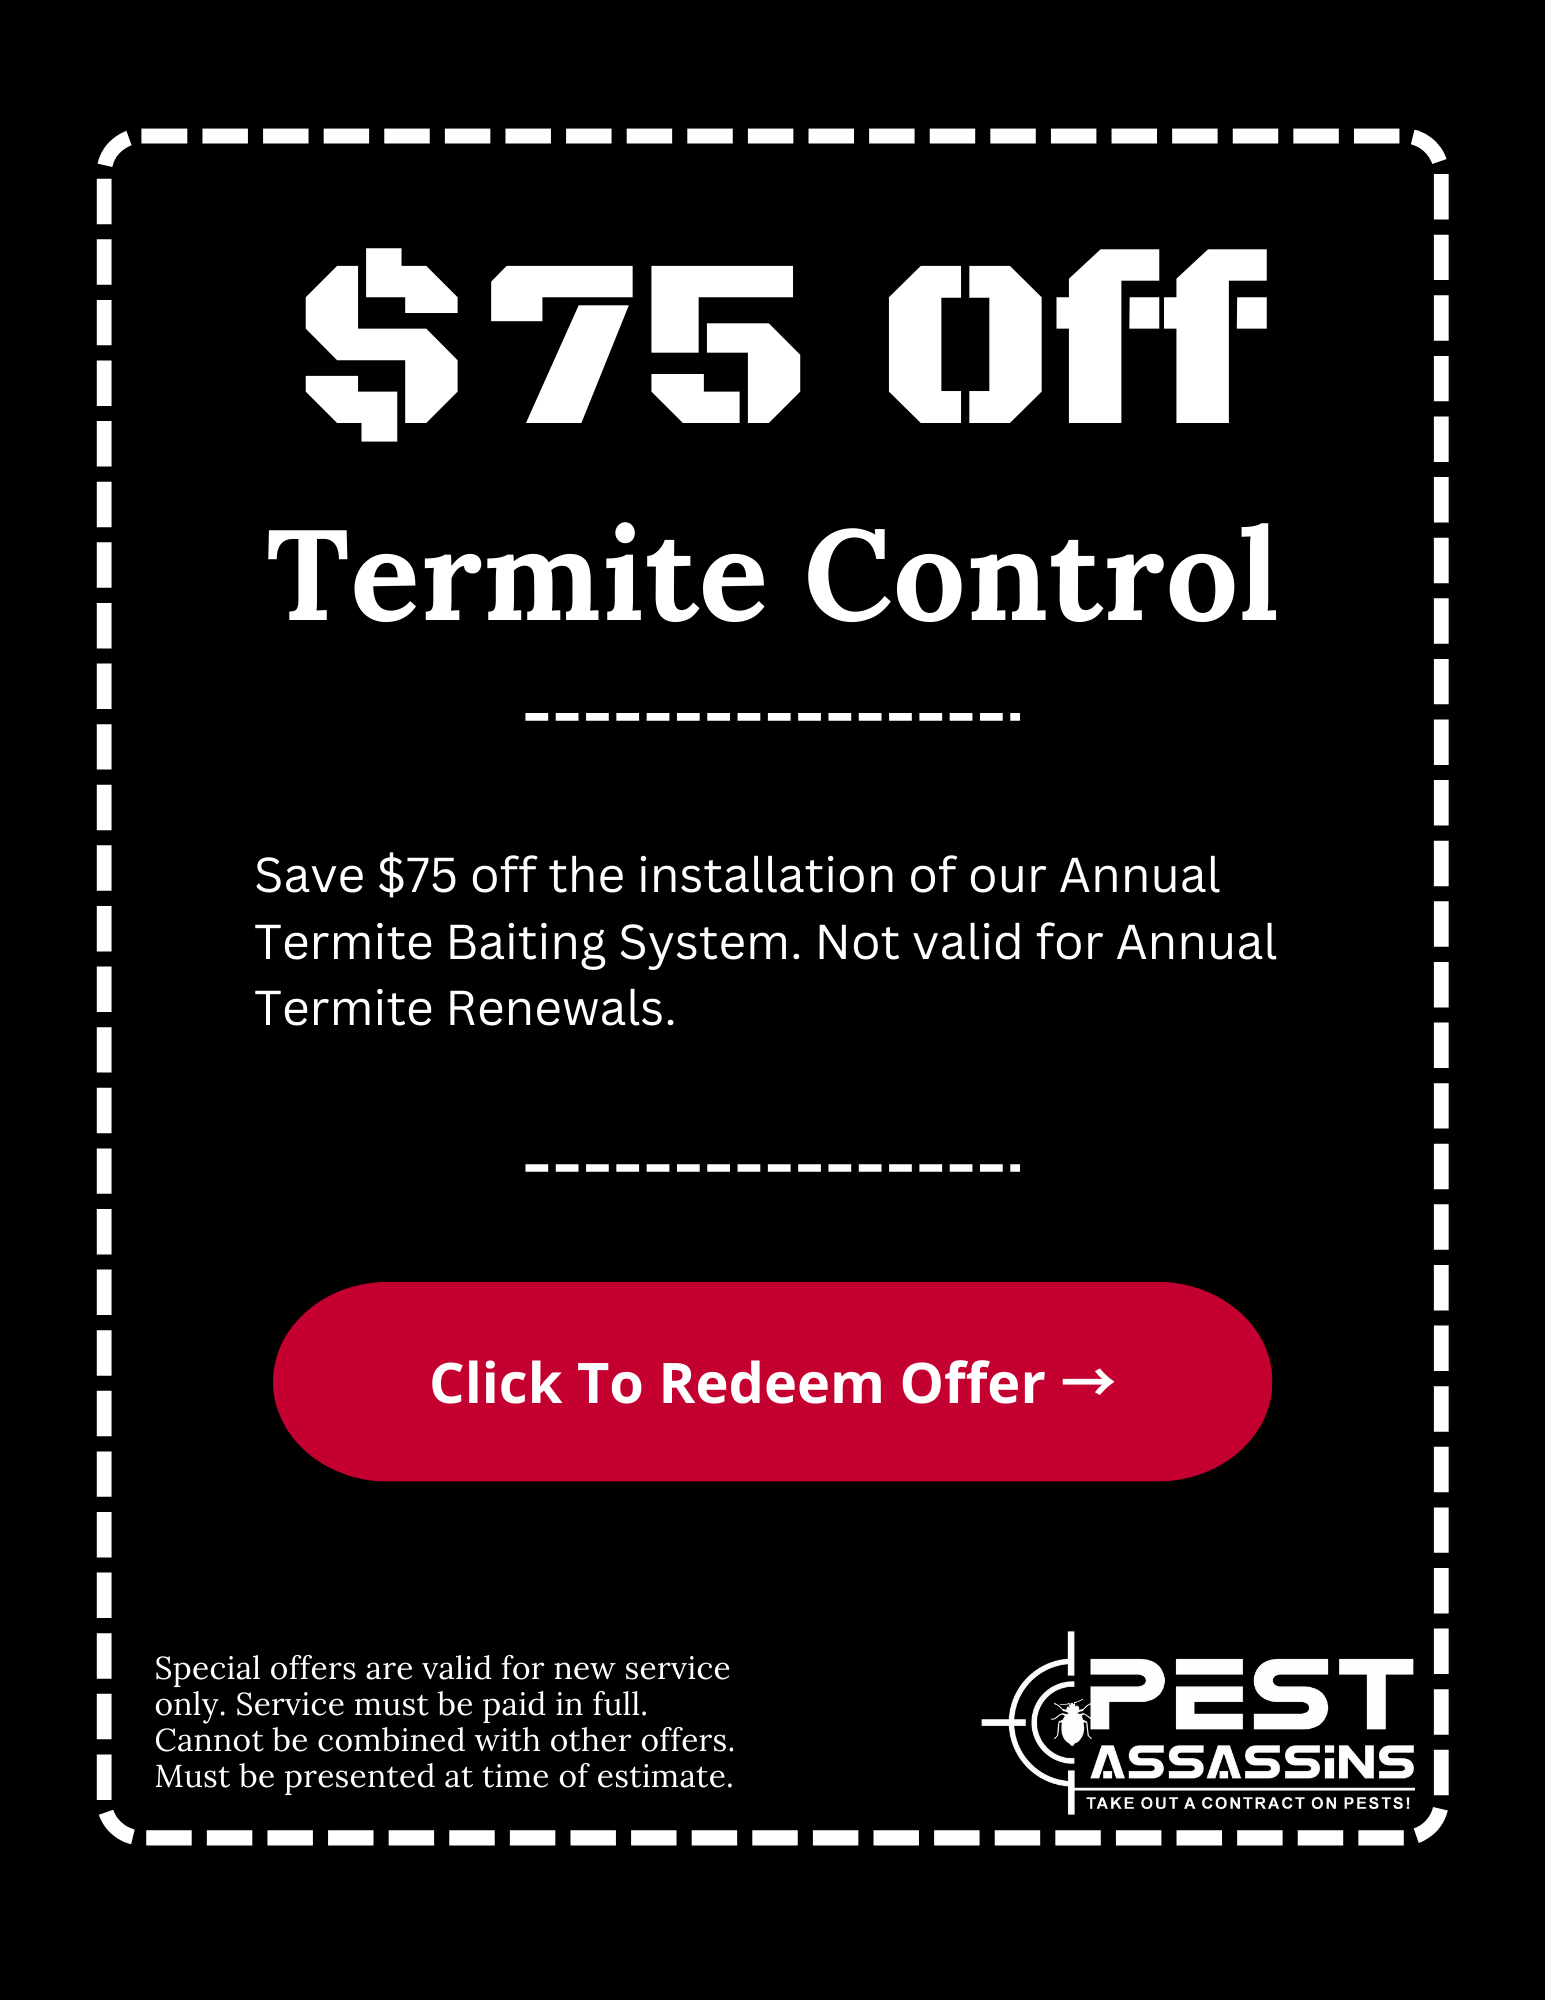 termite control coupon offer Rhode Island and Massachusetts